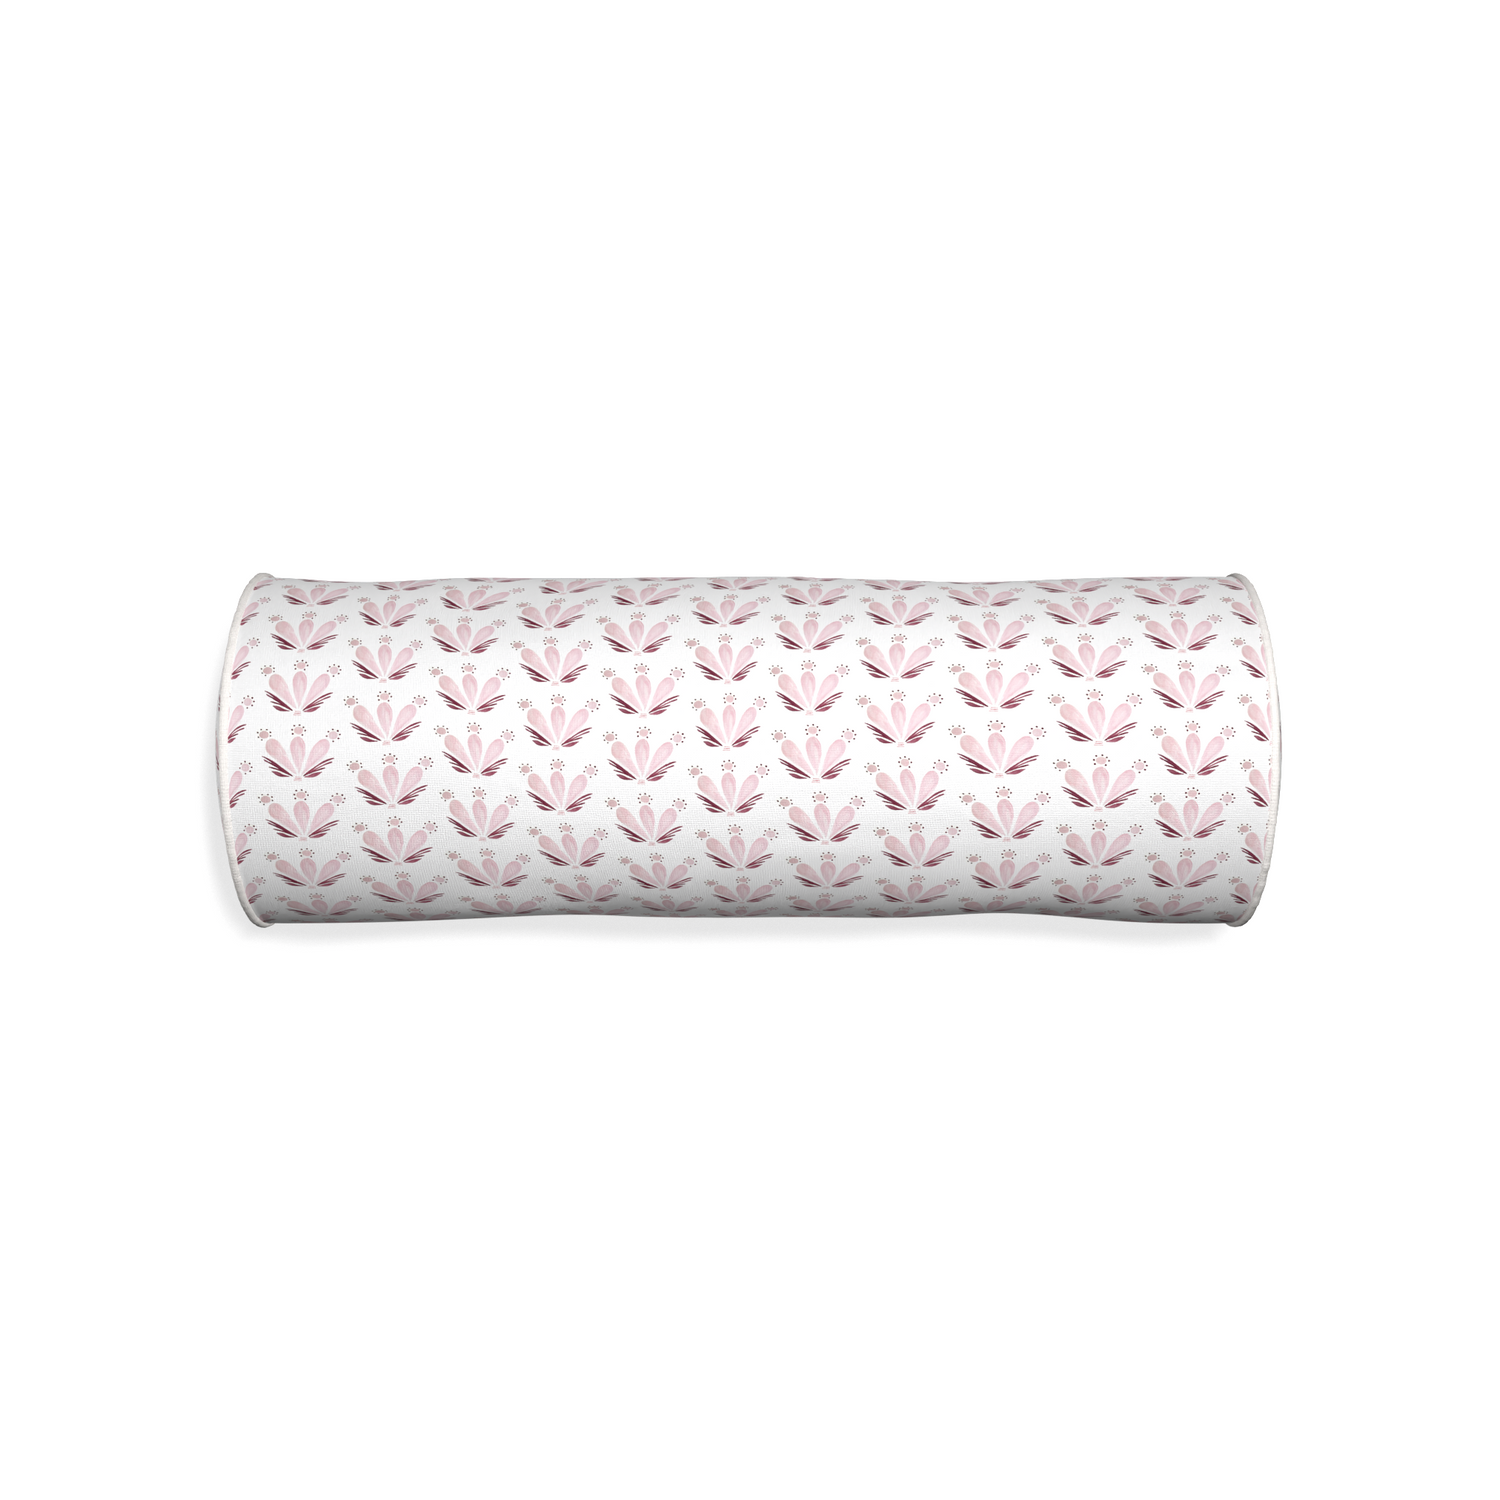 Bolster serena pink custom pink & burgundy drop repeat floralpillow with snow piping on white background